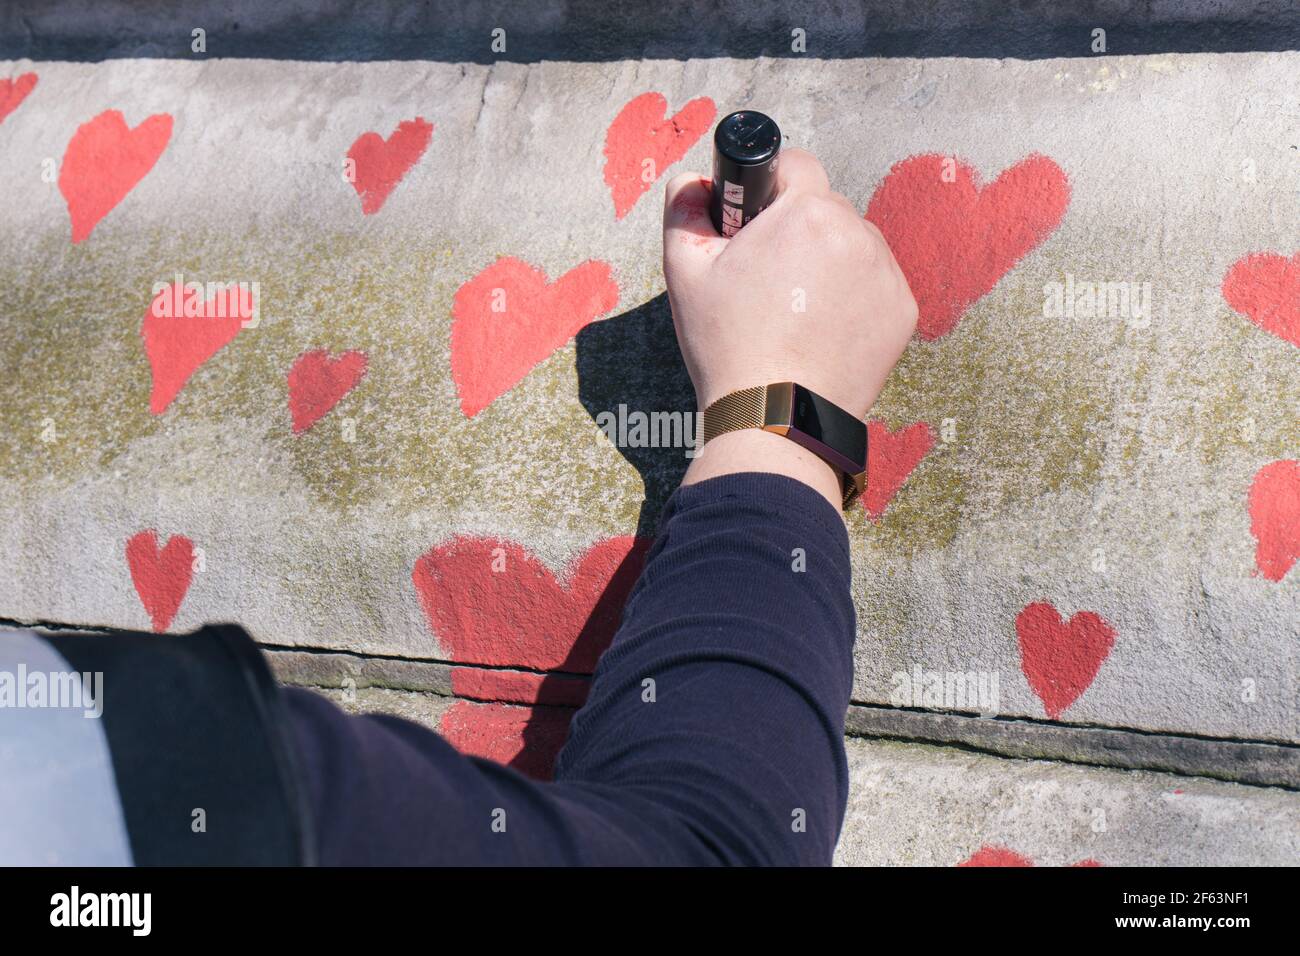 St Thomas's Hospital, London, UK. 29th March 2021. The bereaved and volunteers paint hearts for each person who has died of Covid. Credit: Denise Laura Baker/Alamy Live News Stock Photo